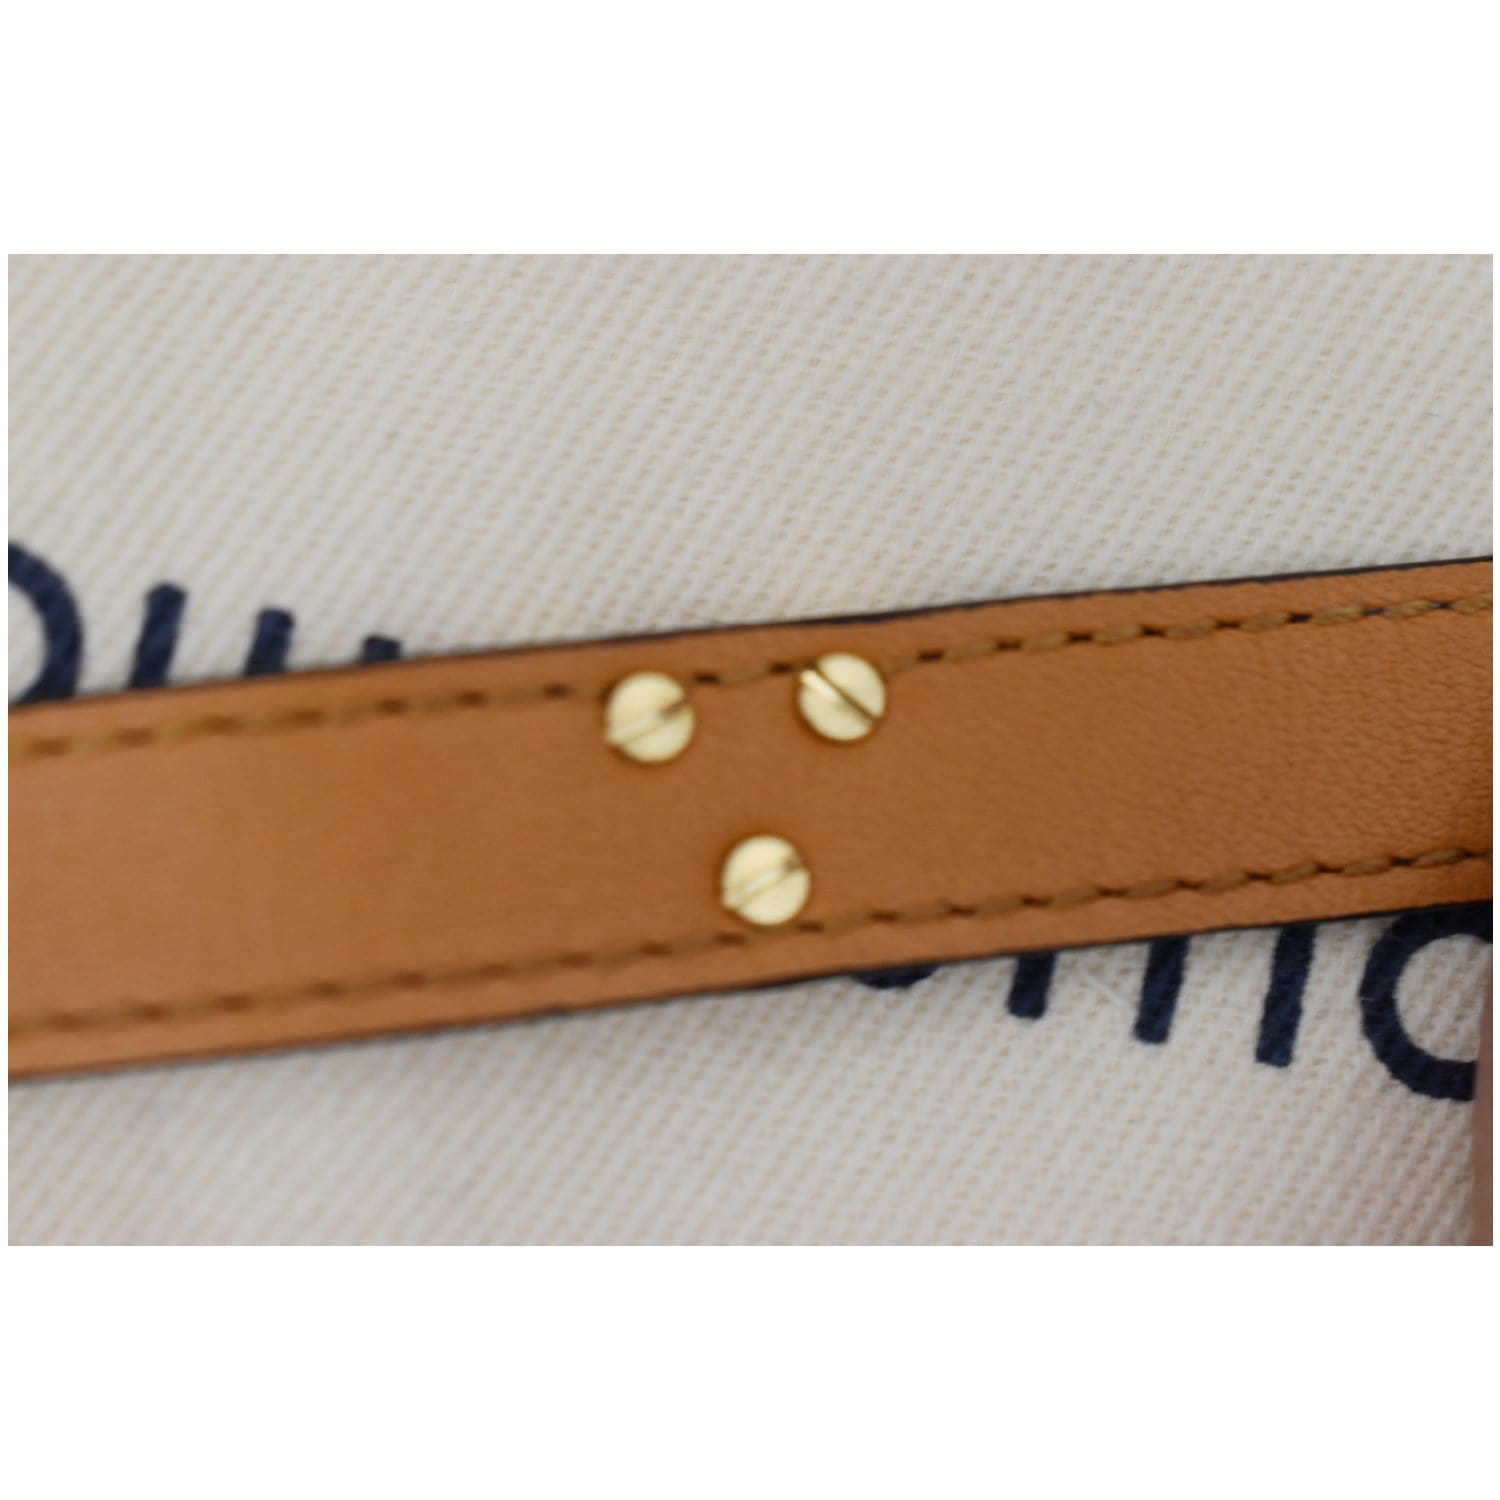 Louis Vuitton Essential V Bracelet, Brown, 17 (Stock Confirmation Required)